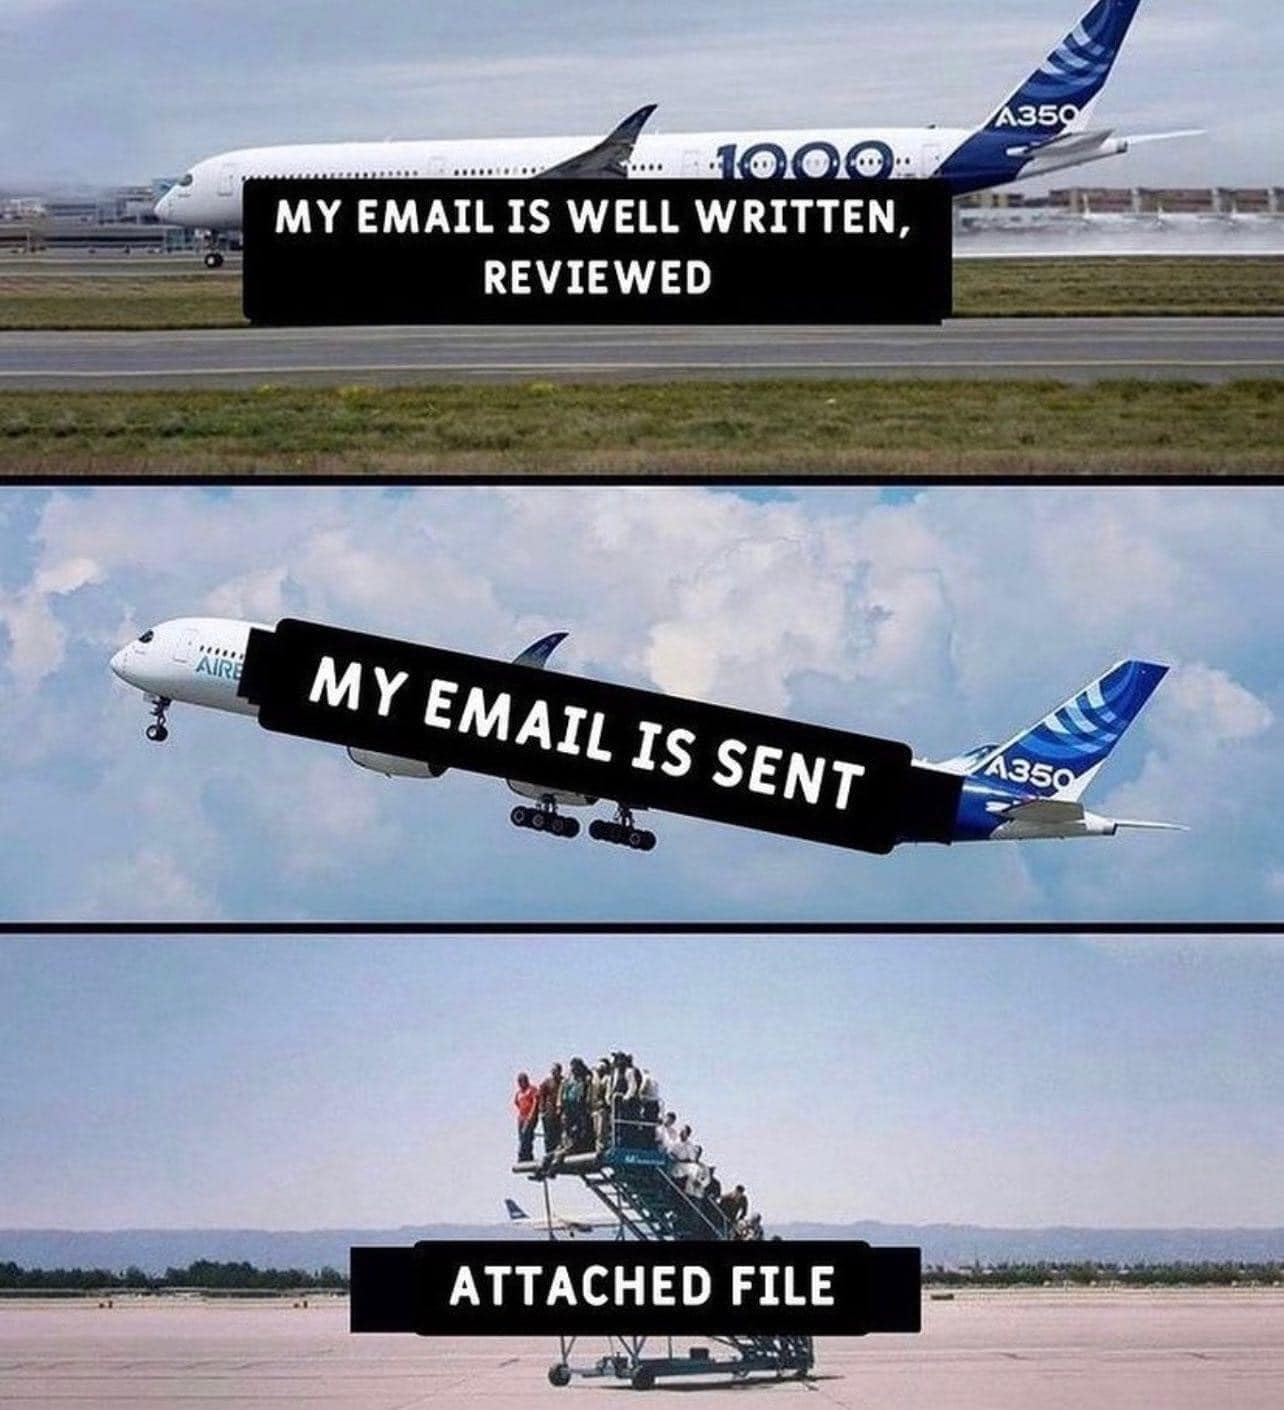 relatable memes - my email is well written - Aire 1000 My Email Is Well Written, Reviewed My Email Is Sent Attached File A350 A350